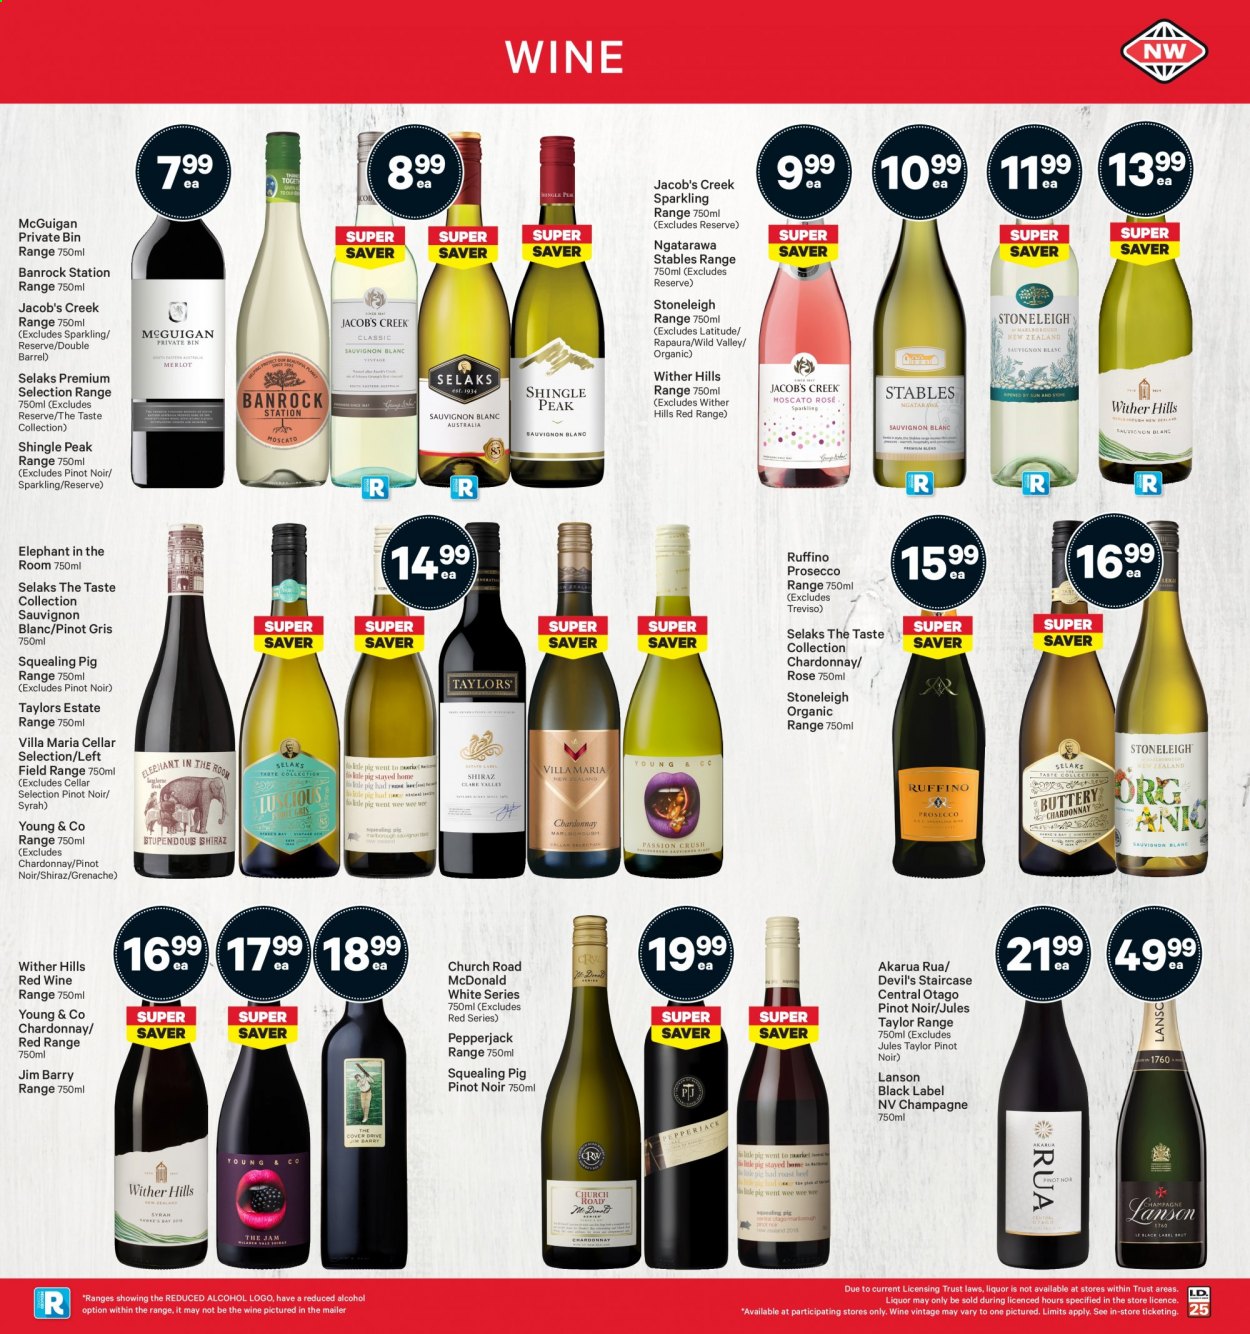 thumbnail - New World mailer - 14.06.2021 - 20.06.2021 - Sales products - Pepper Jack cheese, red wine, white wine, champagne, prosecco, Chardonnay, wine, Pinot Noir, Lanson, Jules Taylor, alcohol, Wither Hills, Syrah, Jacob's Creek, Young & Co, Shiraz, Grenache, Pinot Grigio, Sauvignon Blanc, rosé wine. Page 31.